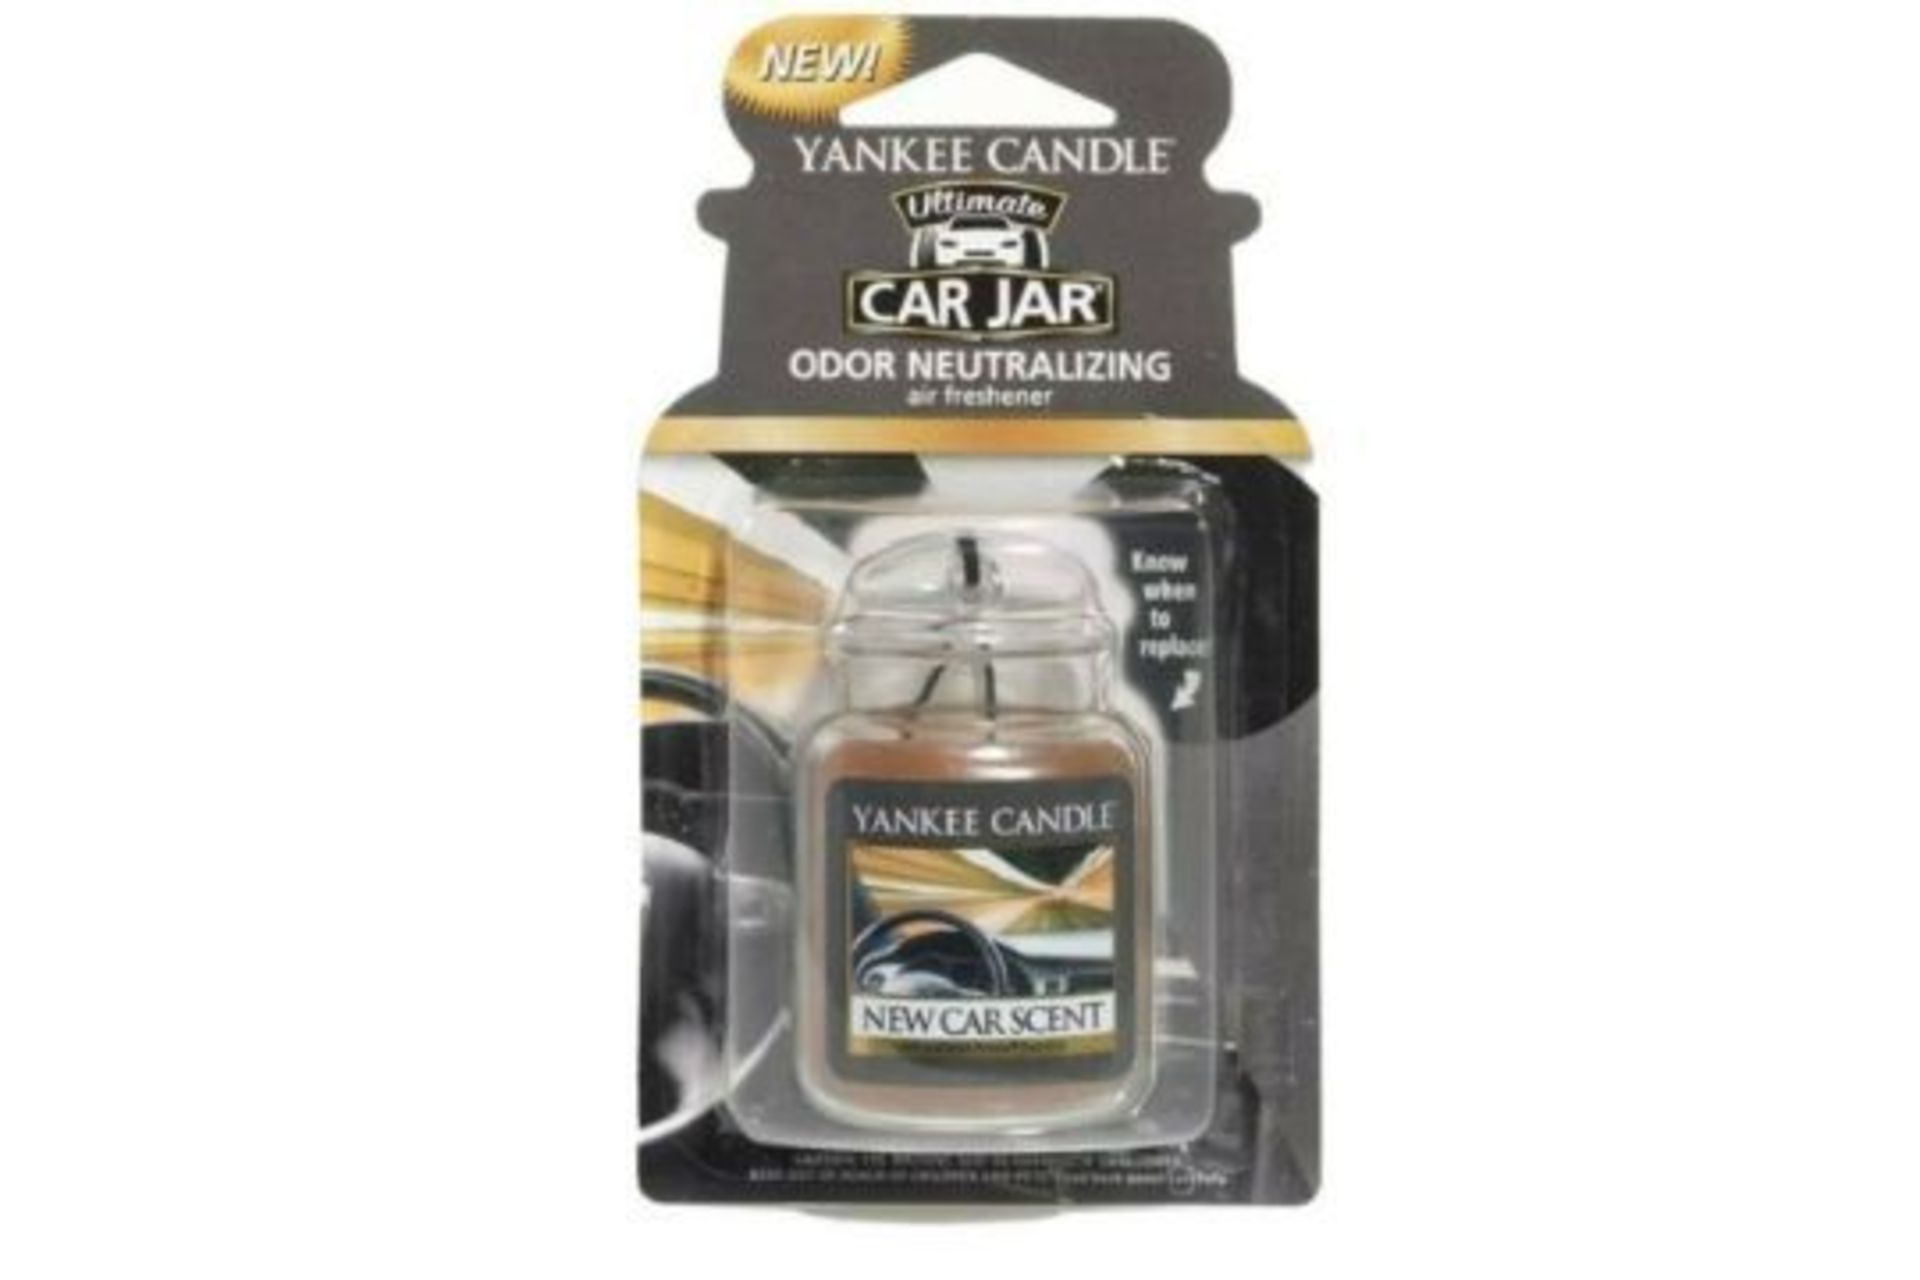 40 X BRAND NEW YANKEE CANDLE NEW CAR SCENT ULTIMATE CAR JAR AIR FRESHENERS R5